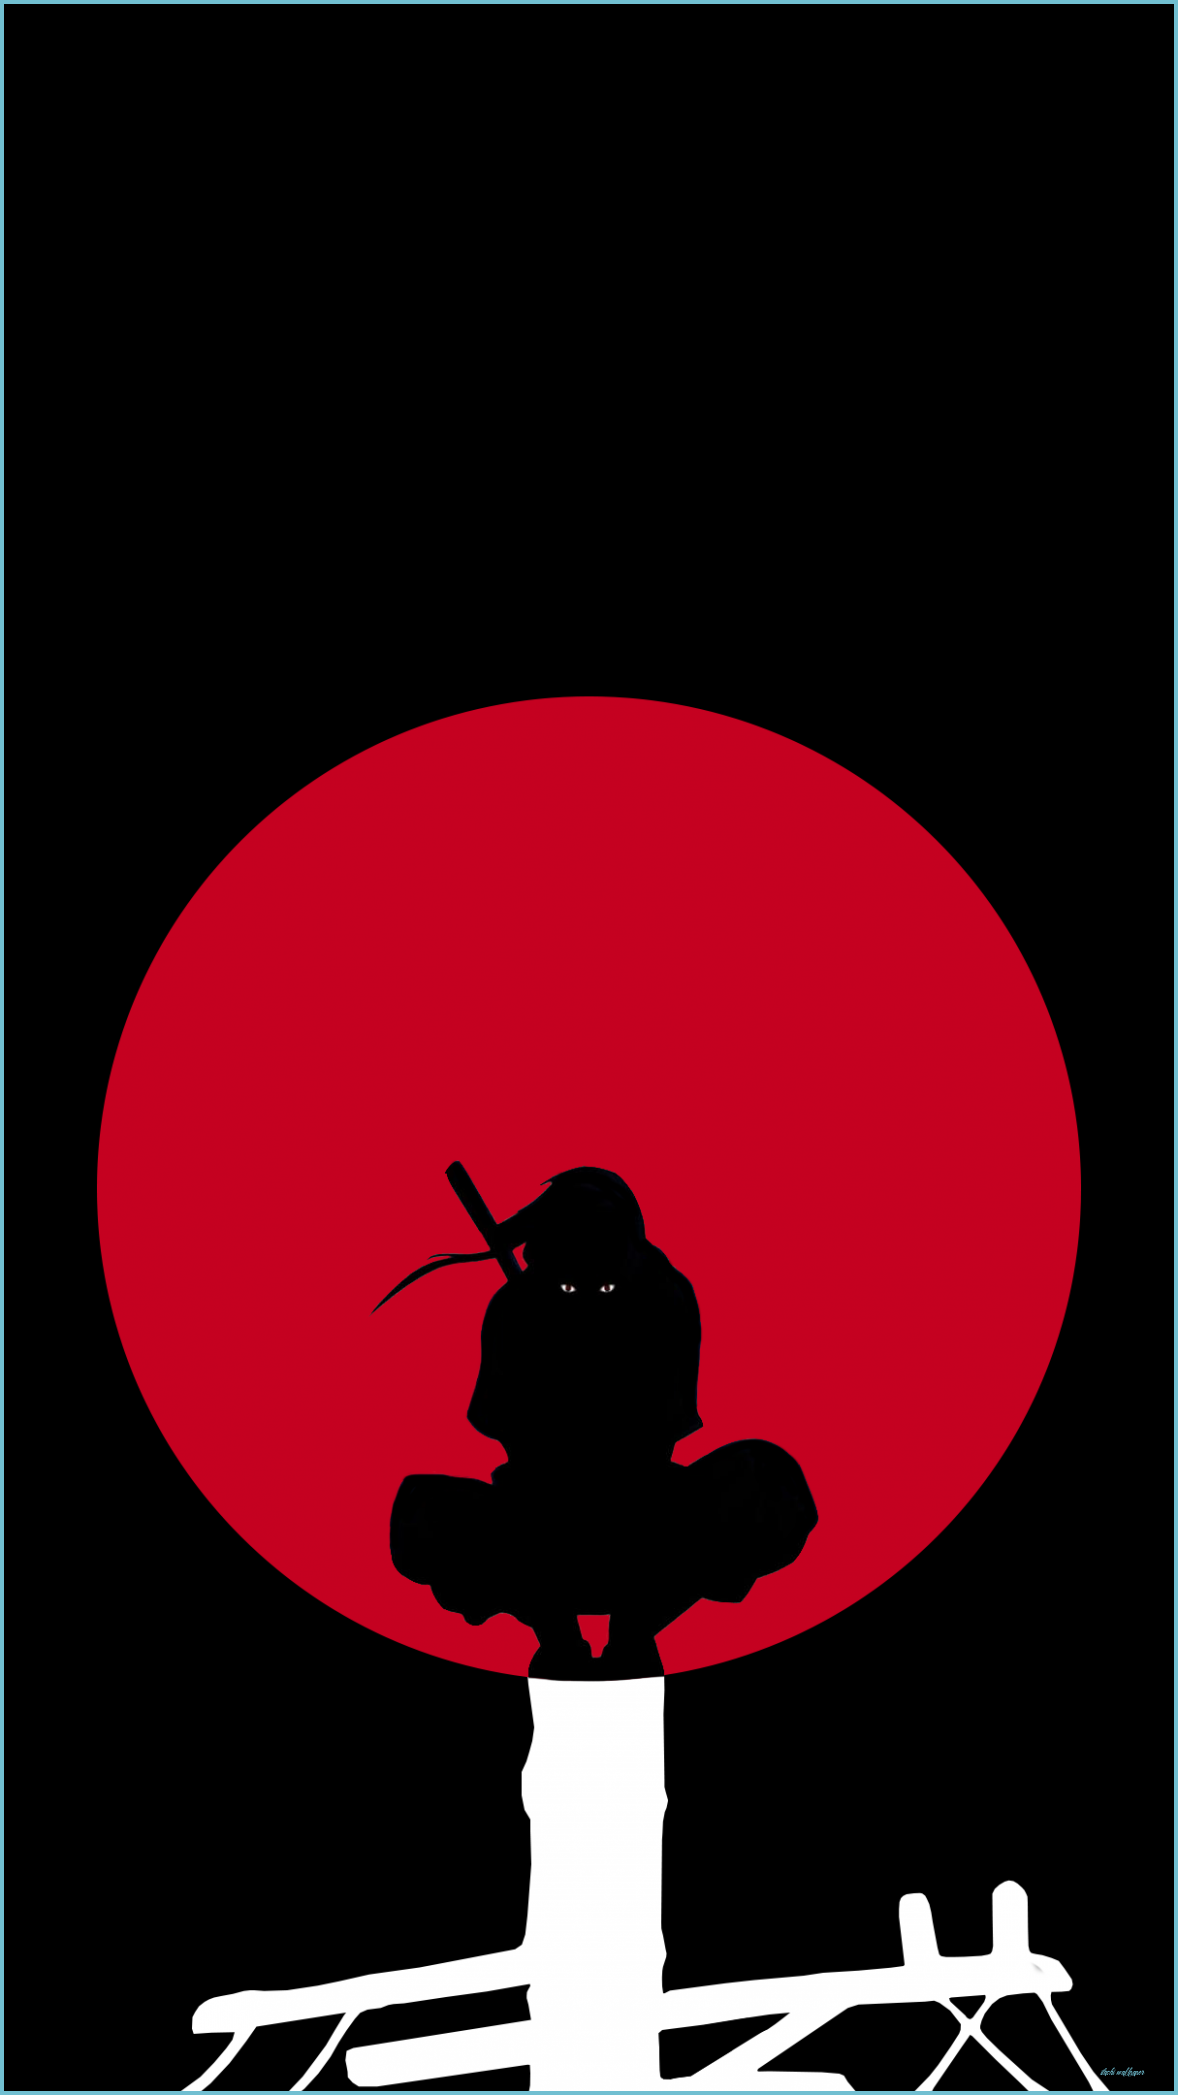 Since there were no good Itachi amoled wallpapers, I made one on